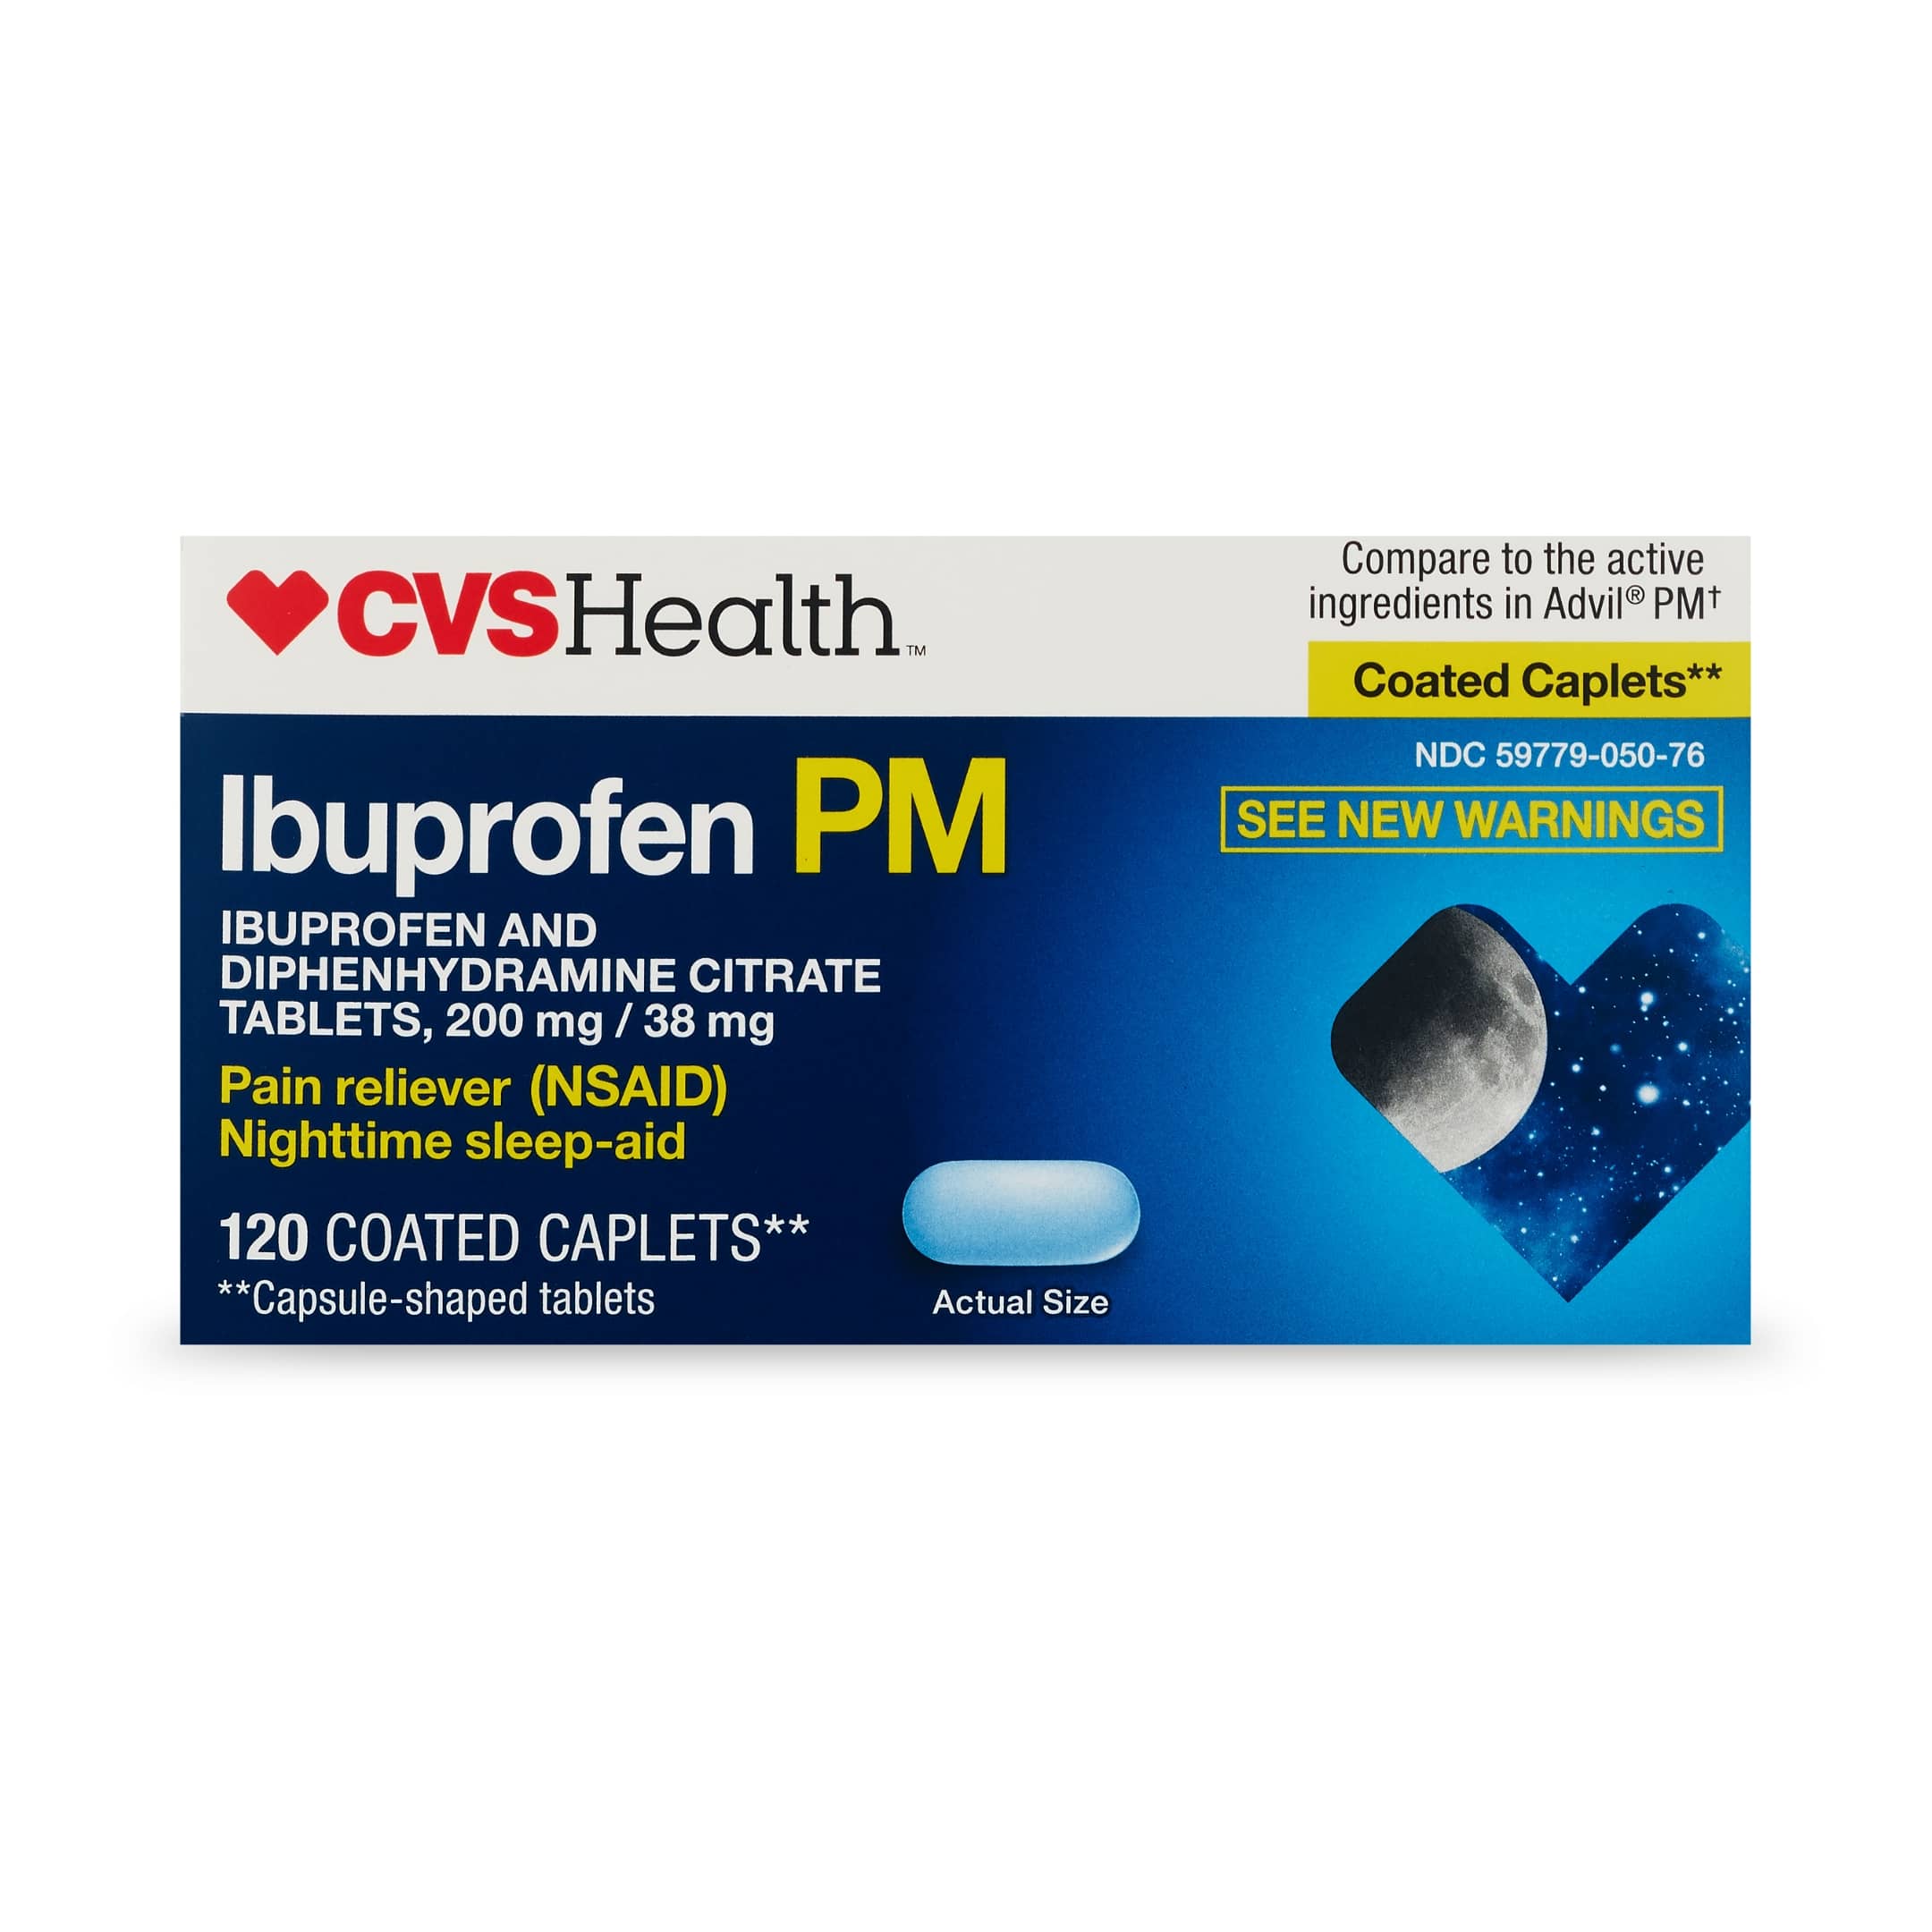 CVS Health Ibuprofen and Diphenhydramine Citrate Tablets, 200 mg/38 mg, Pain Reliever (NSAID)/Nighttime Sleep-Aid, 120 CT